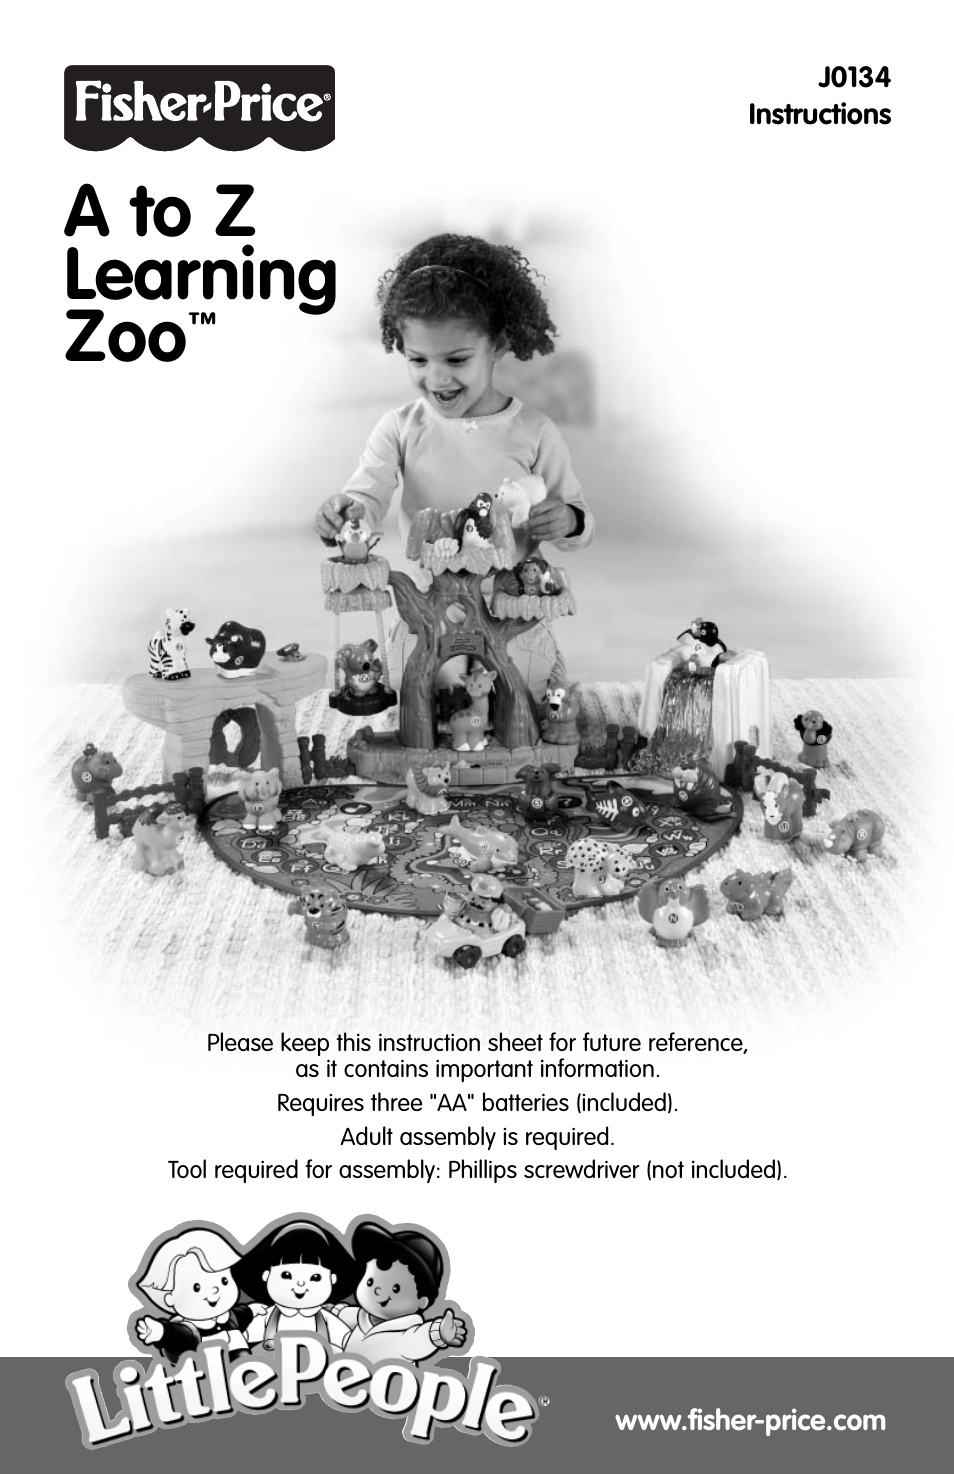 A TO Z LEARNING ZOO J0134